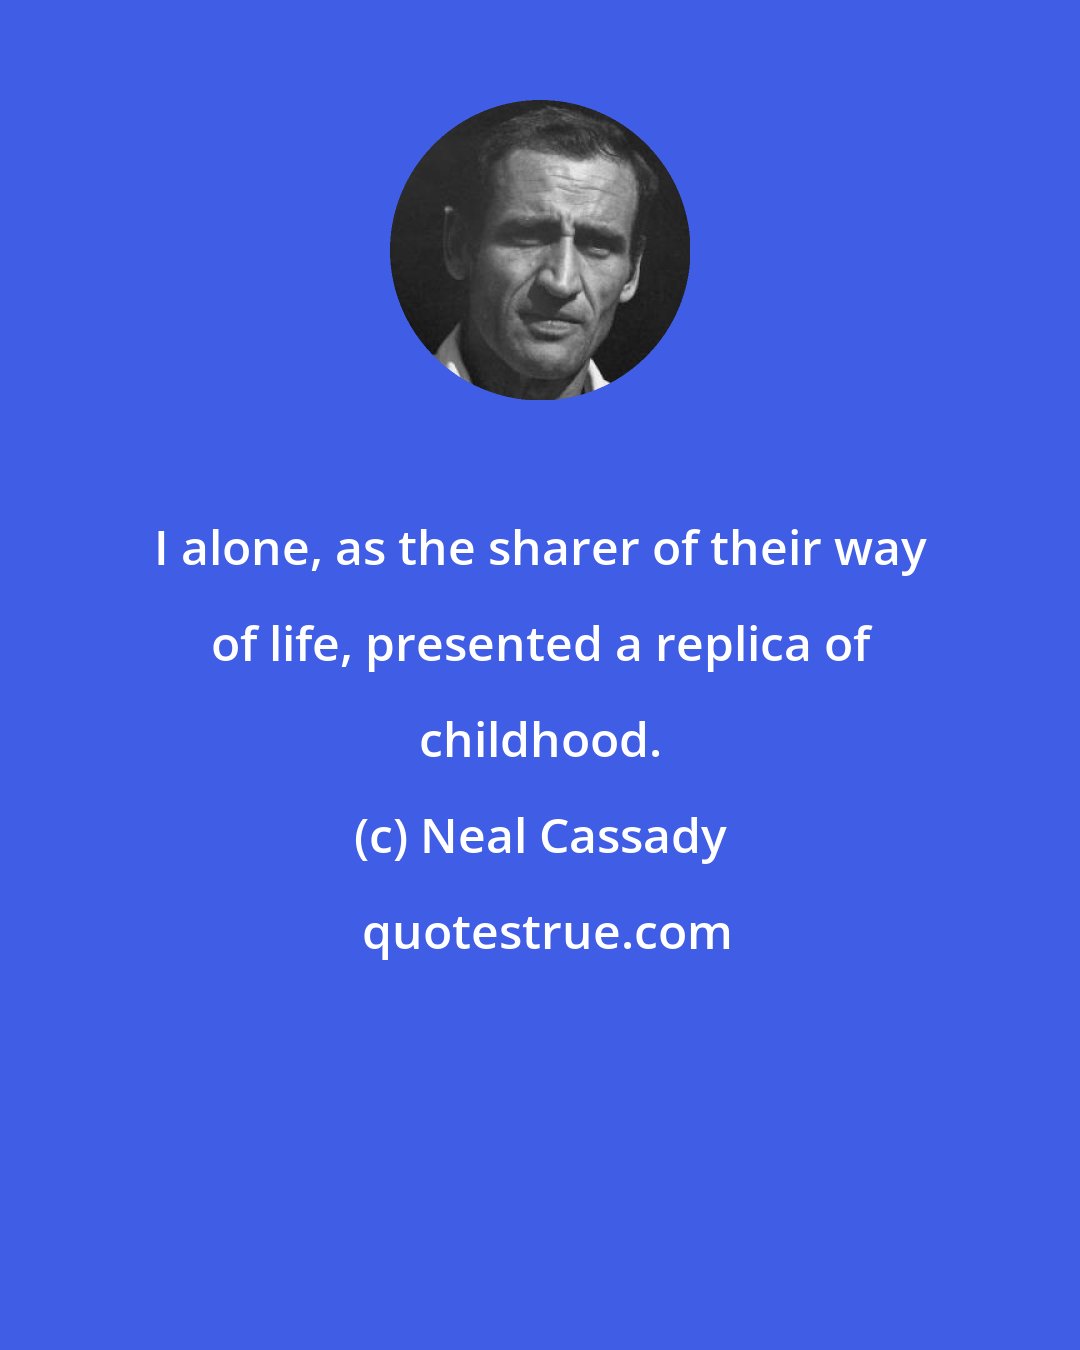 Neal Cassady: I alone, as the sharer of their way of life, presented a replica of childhood.